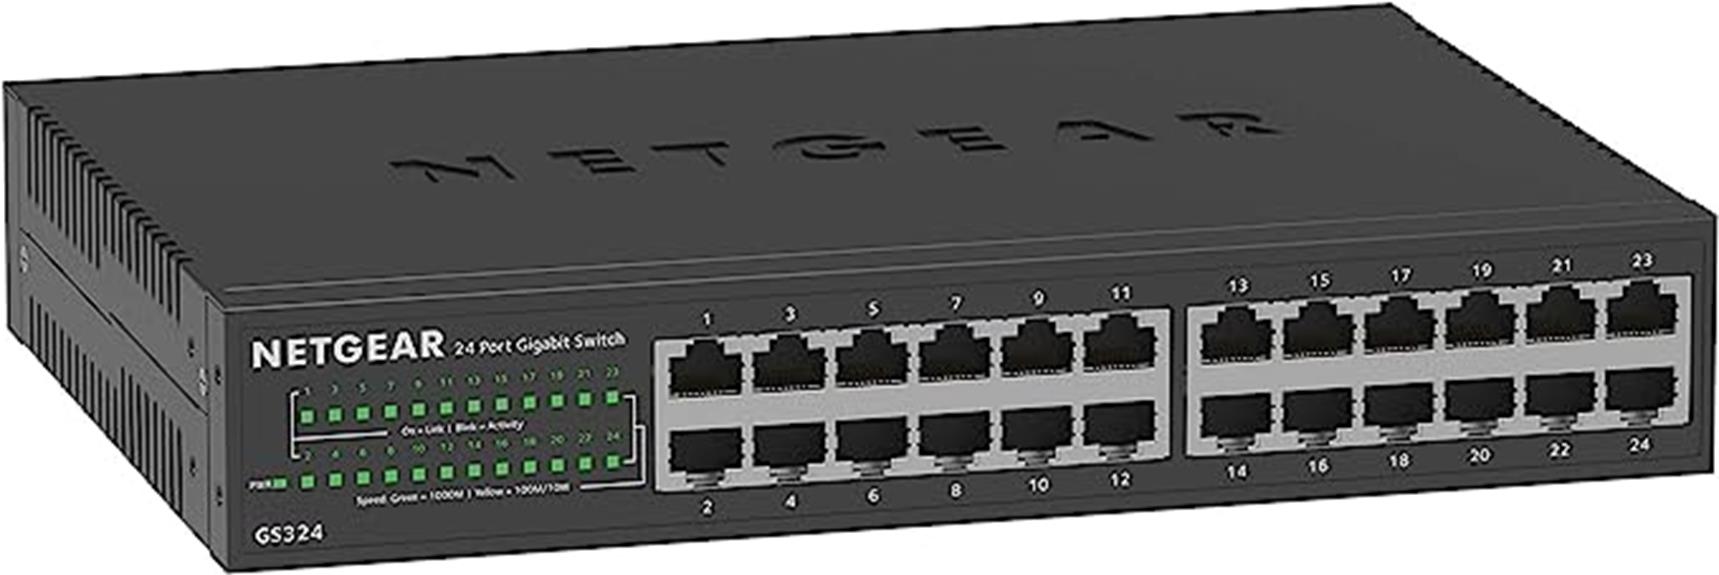 dependable and quiet network switch